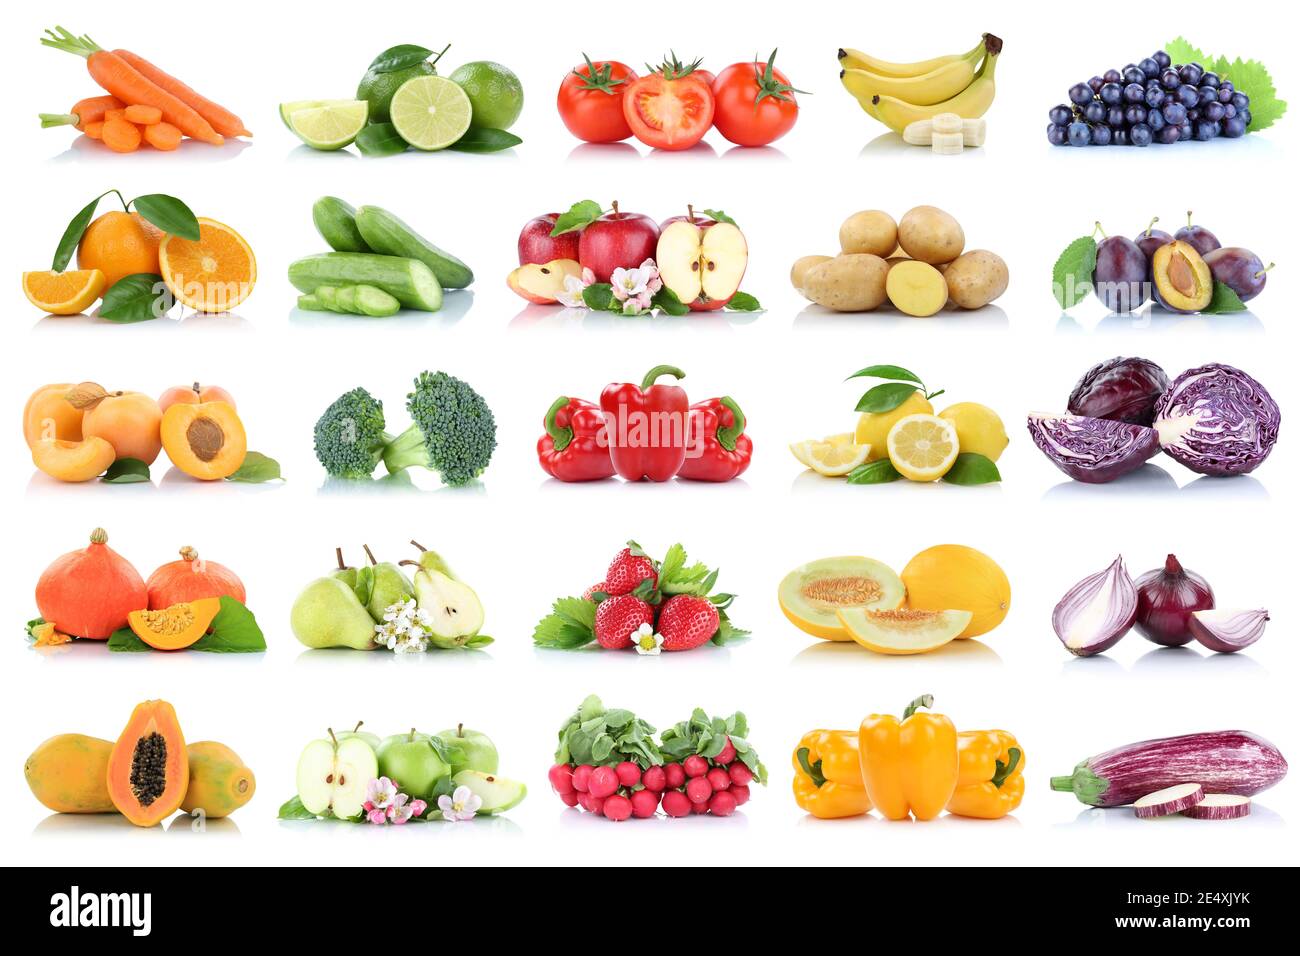 Fruits vegetables collection isolated apple apples oranges bell pepper grapes tomatoes banana colors fresh fruit on a white background Stock Photo